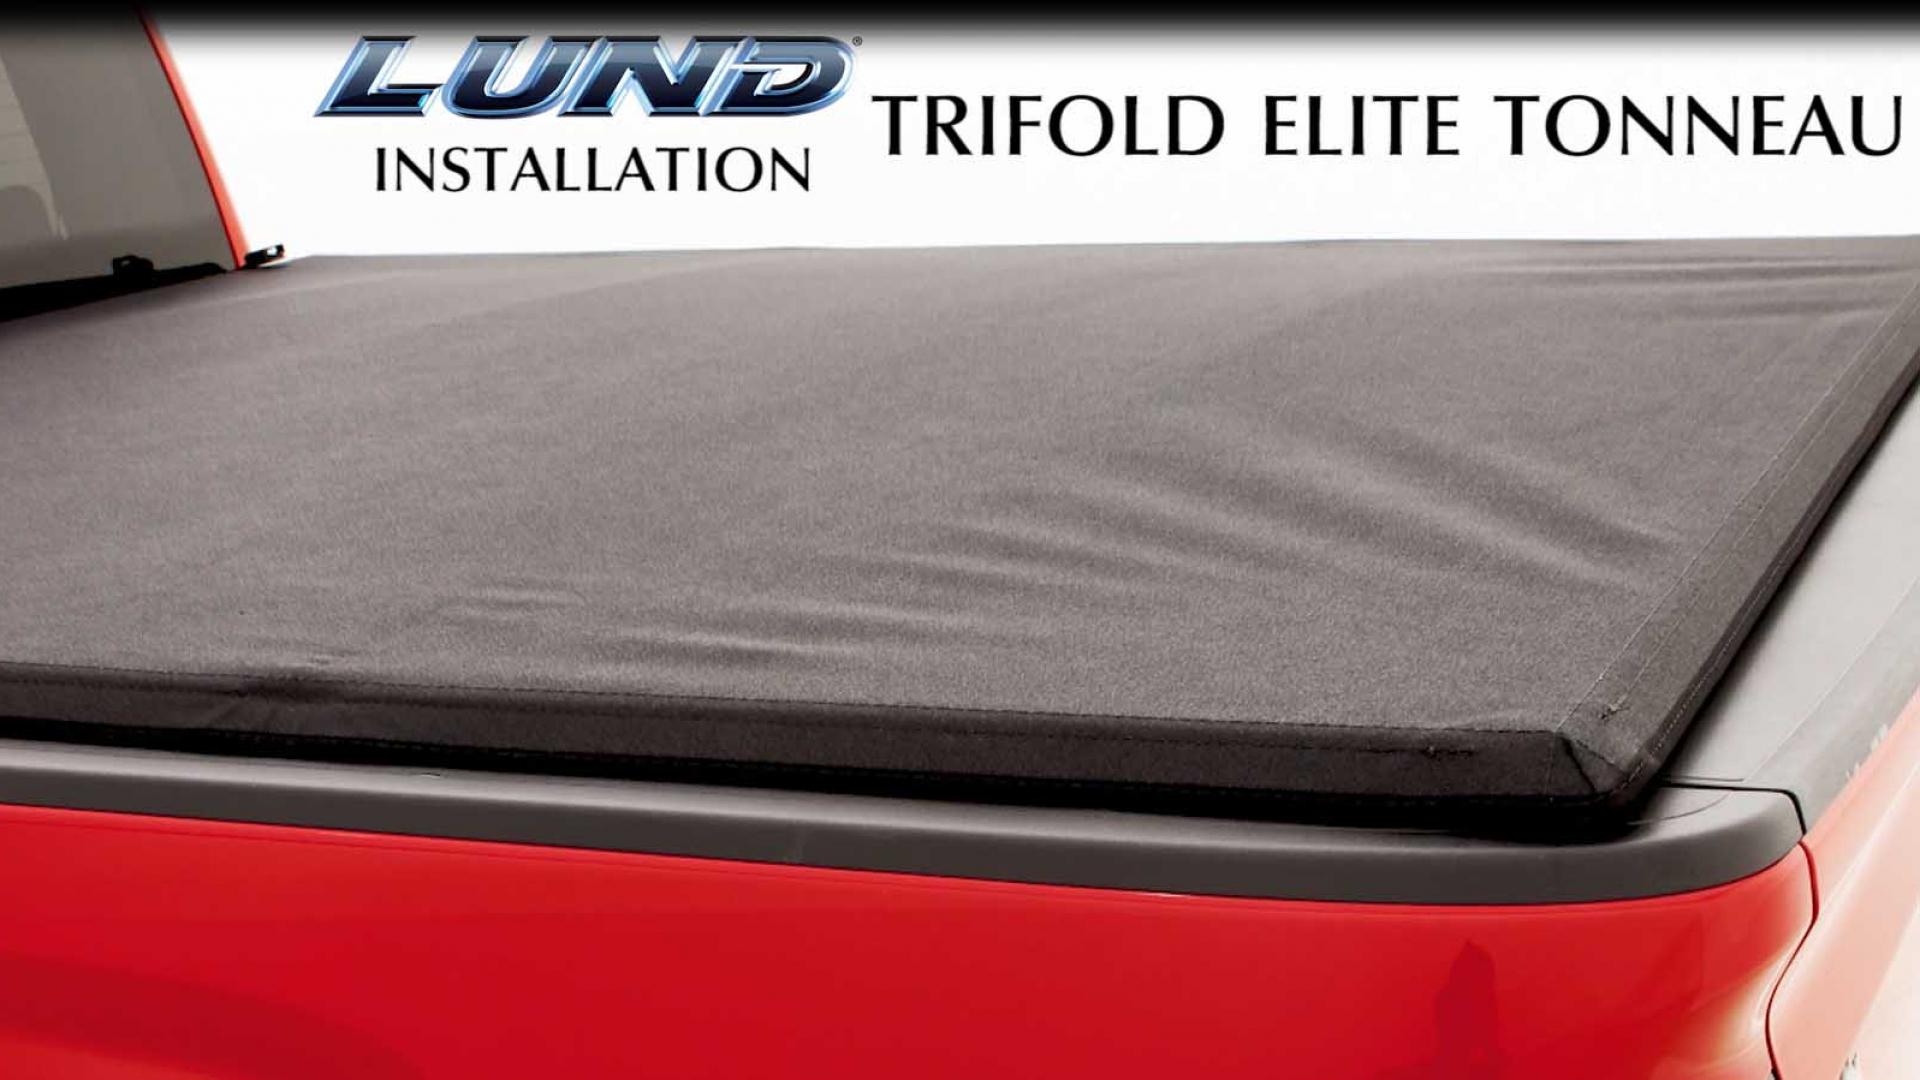 Tri Fold Elite Tonneau Installation A step-by-step tutorial on how to install the Lund Elite Tonneau Cover.